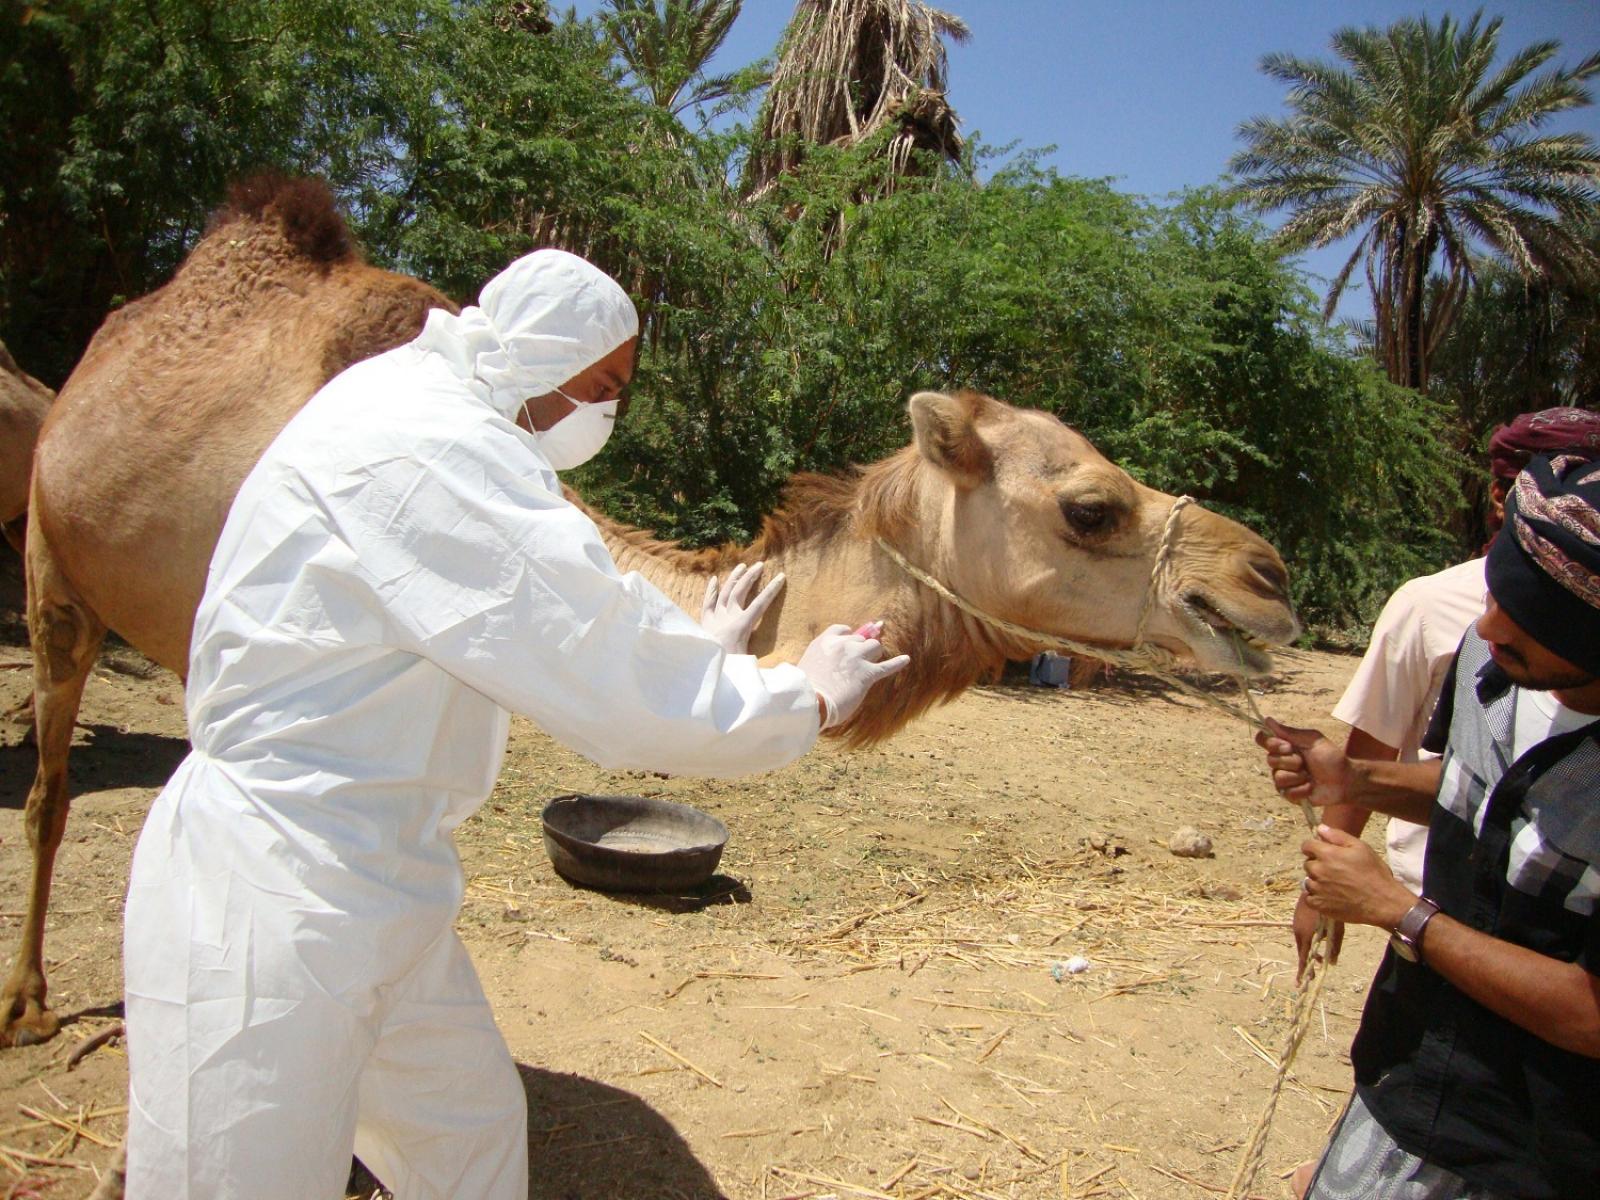 MERS test of camel